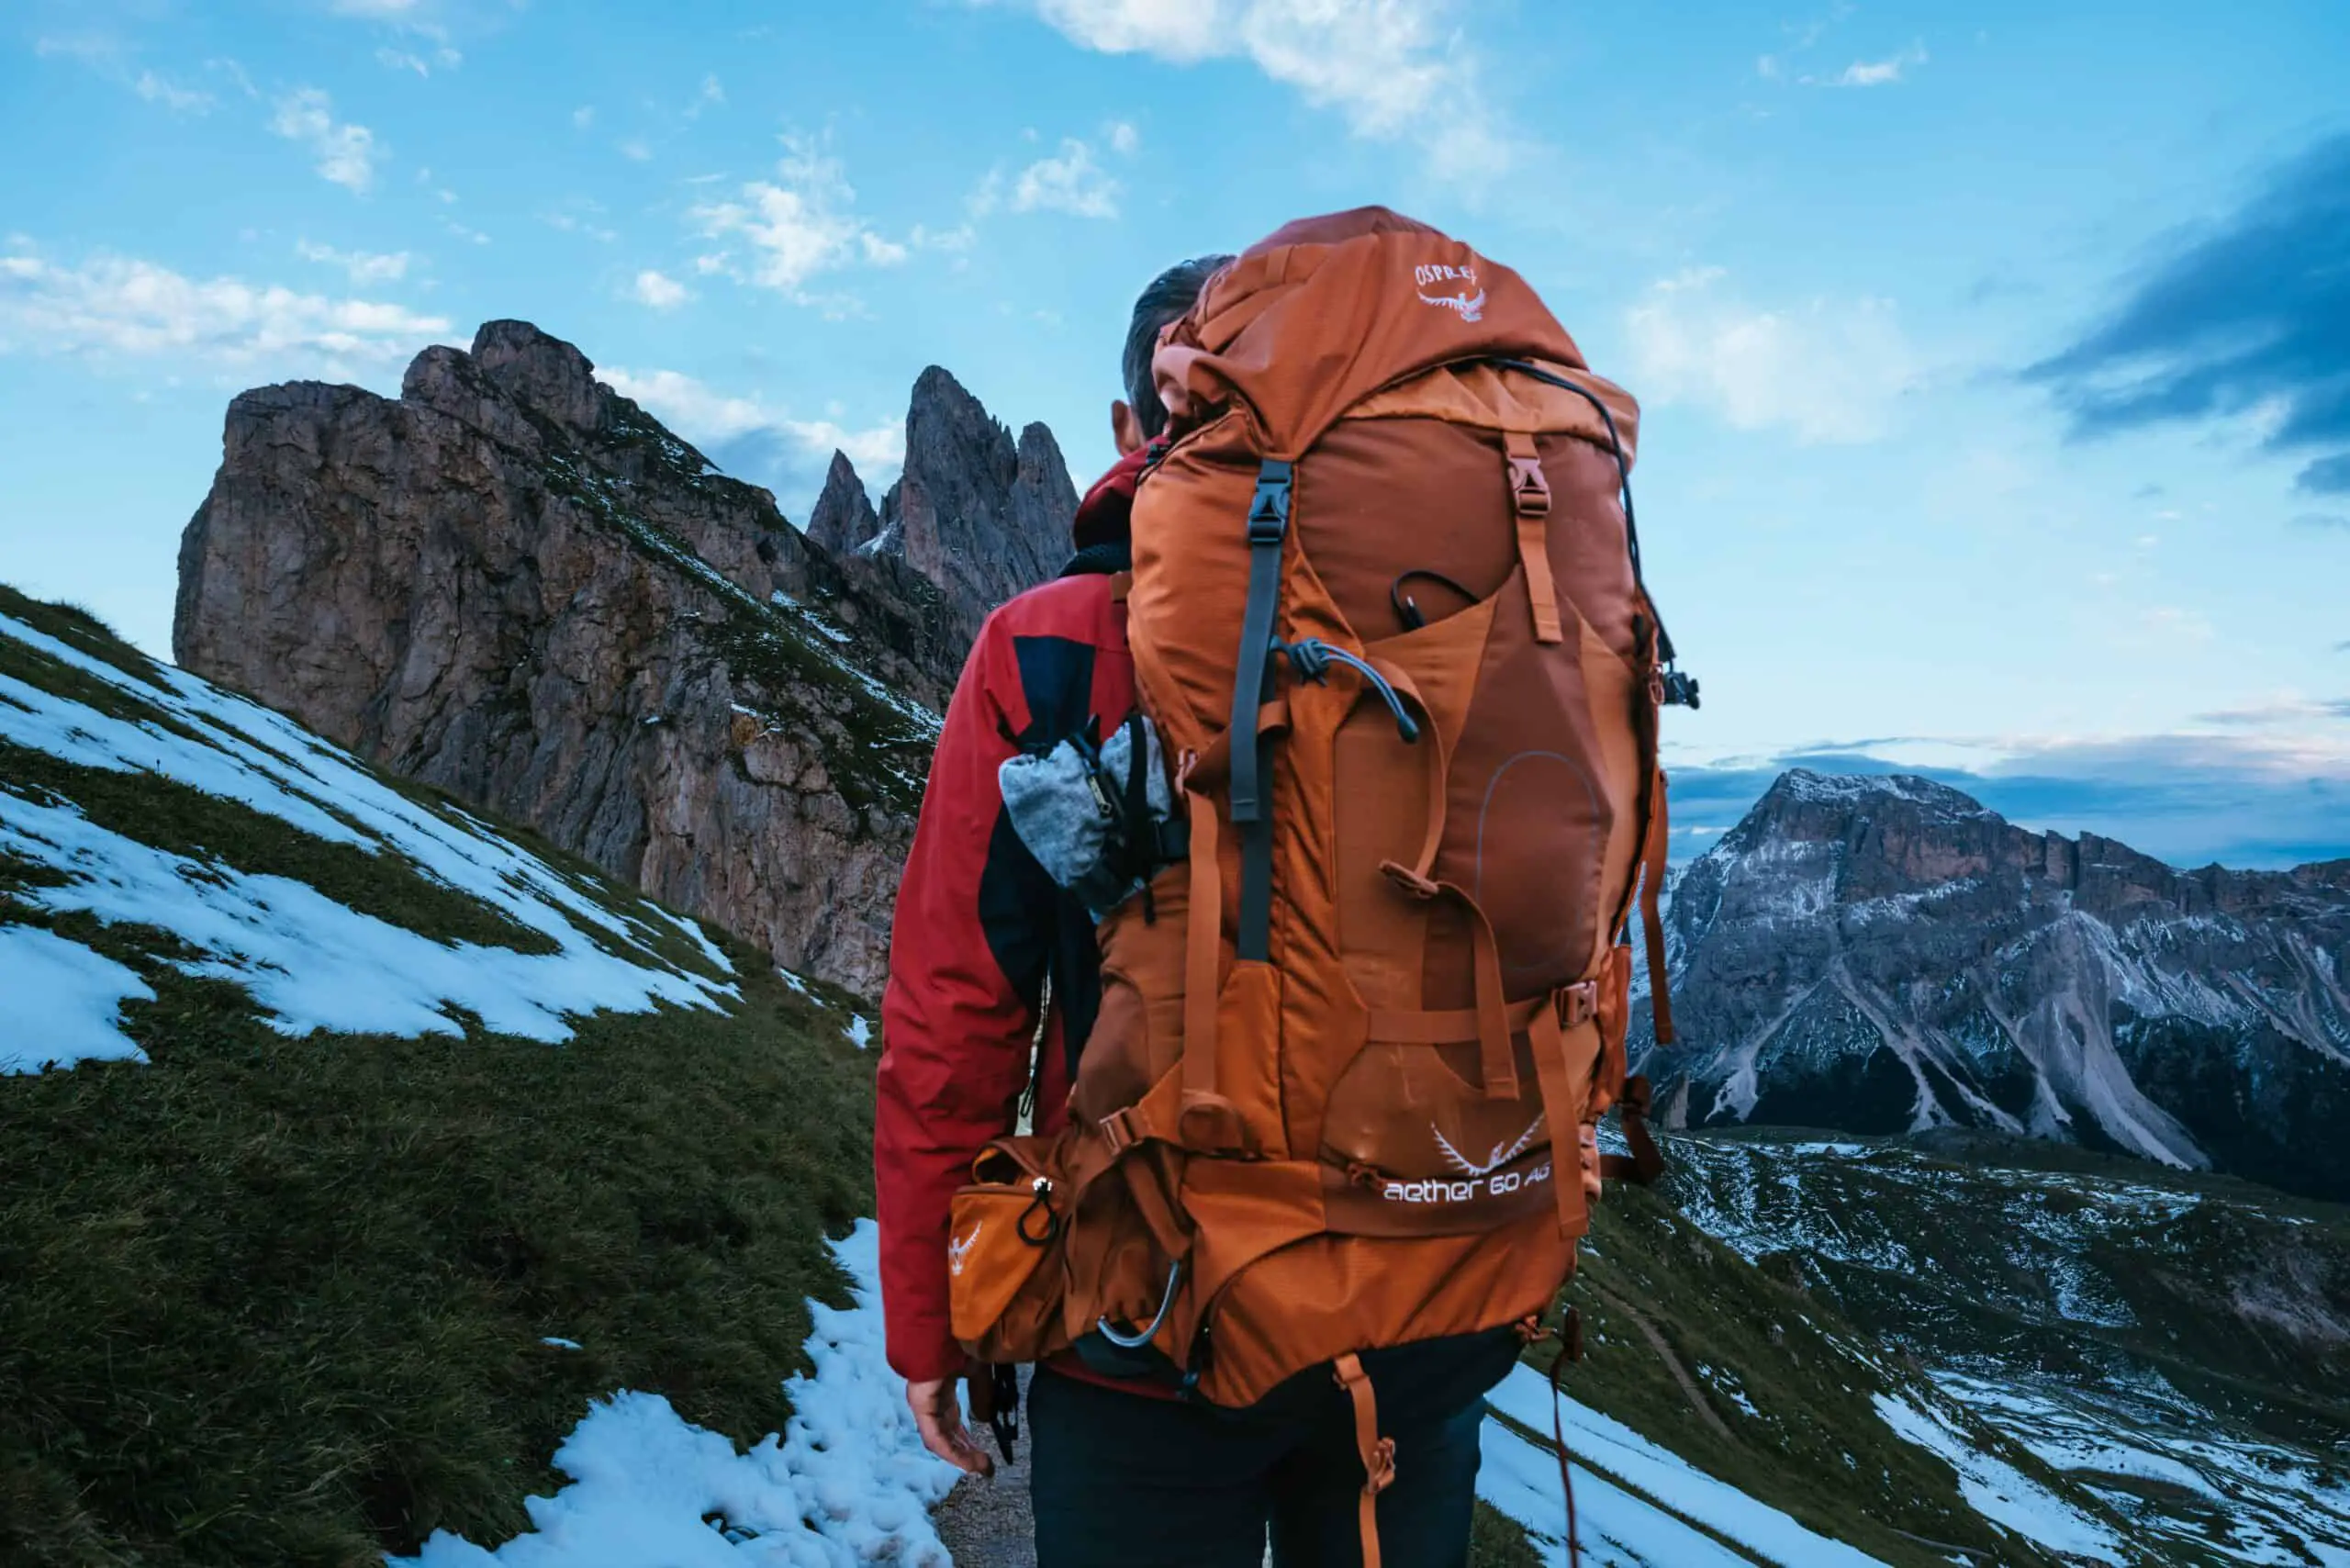 How Heavy Is Too Heavy for Backpacking?